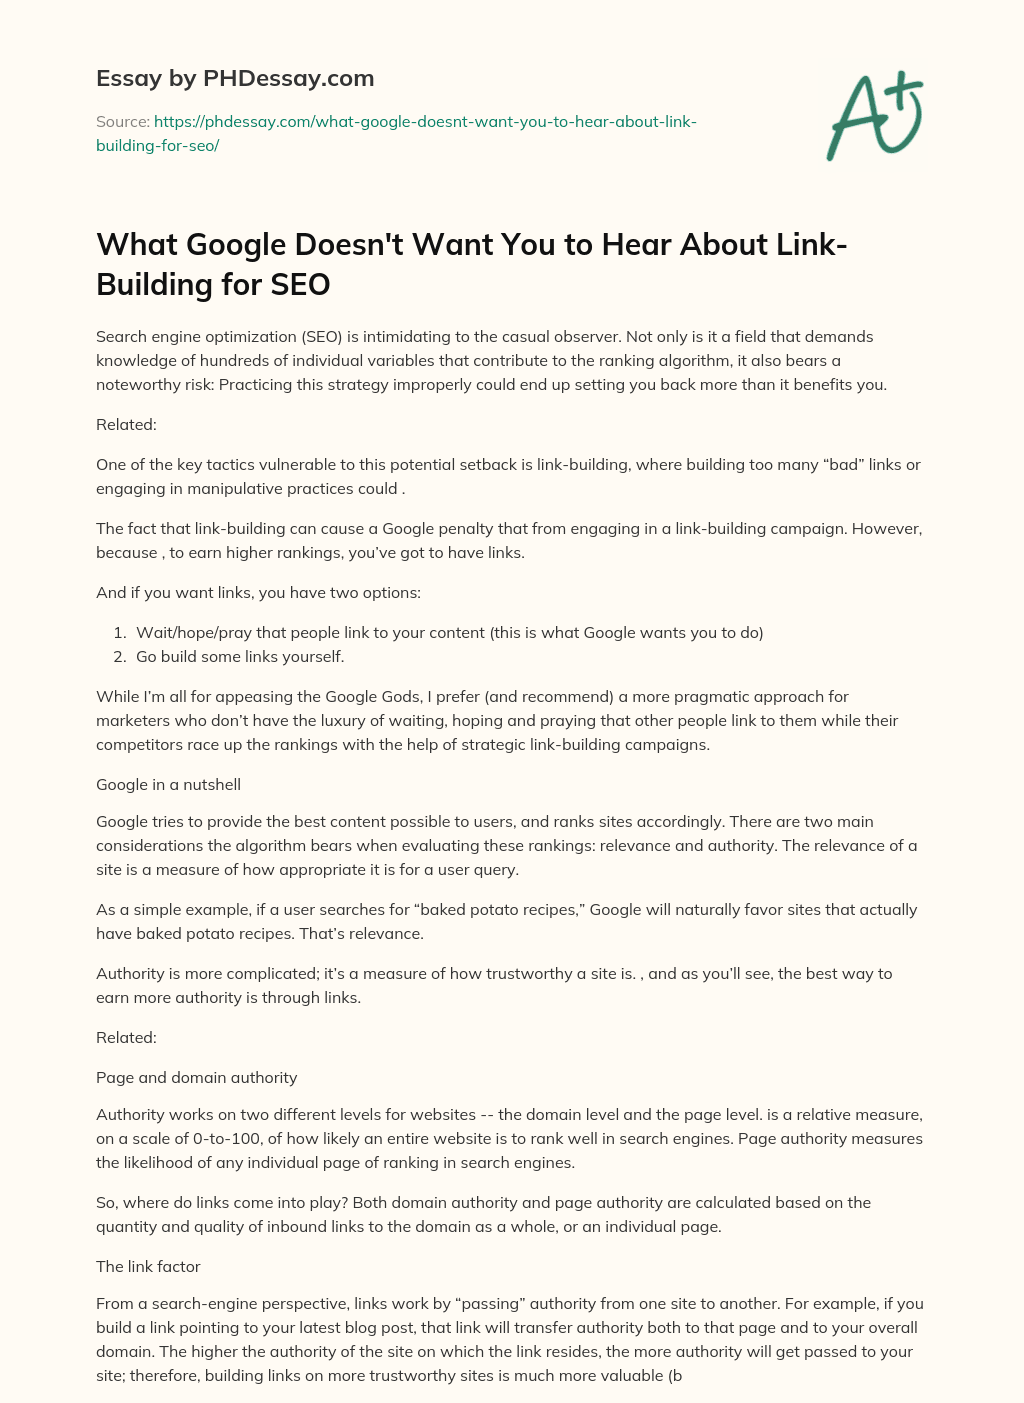 What Google Doesn’t Want You to Hear About Link-Building for SEO essay